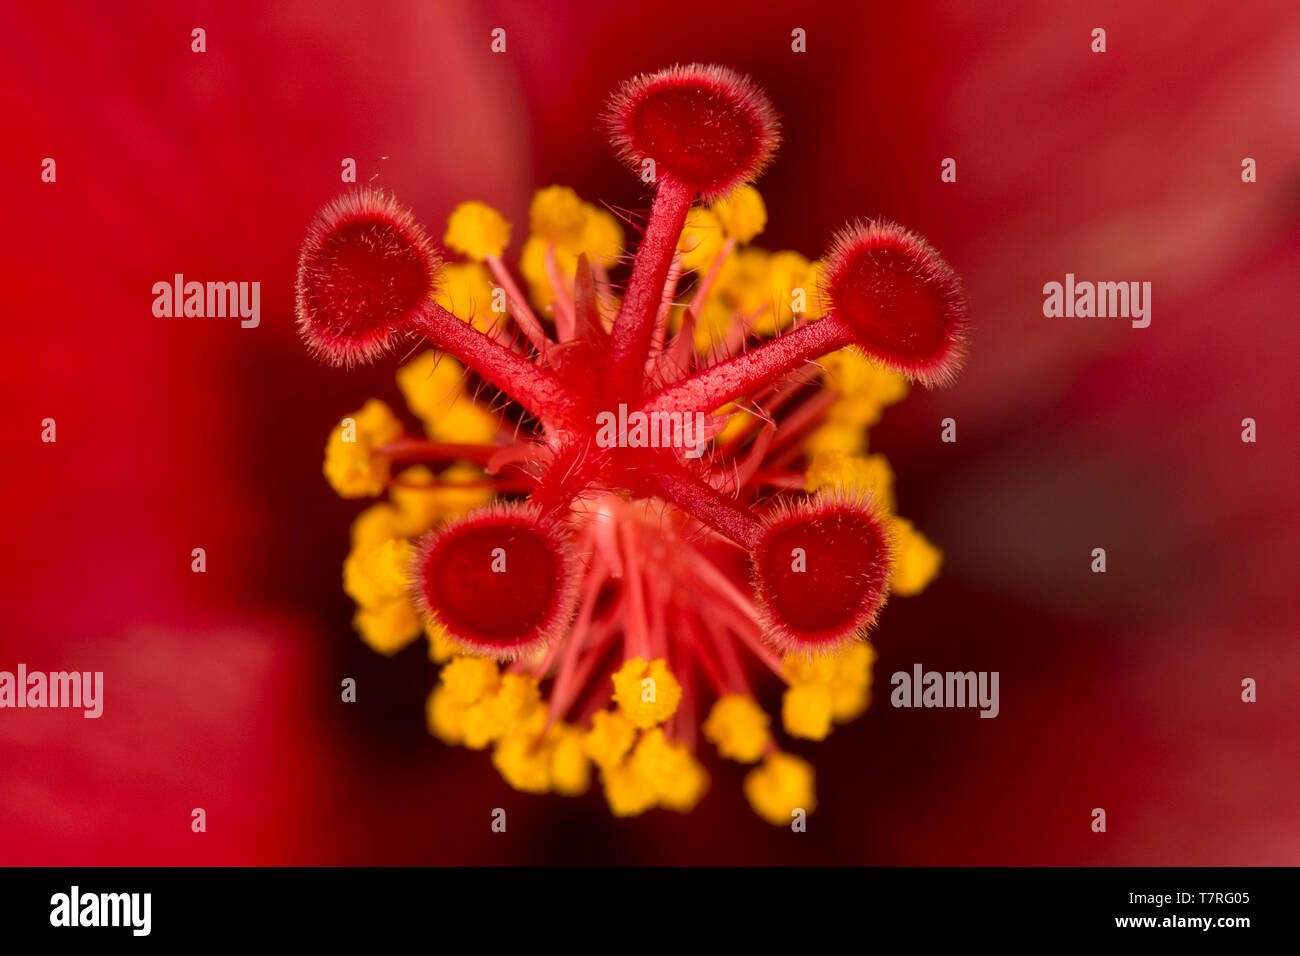 Stigma, style, anthers and stamens from the flower of an Hibiscus rosa-sinensis plant Stock Photo